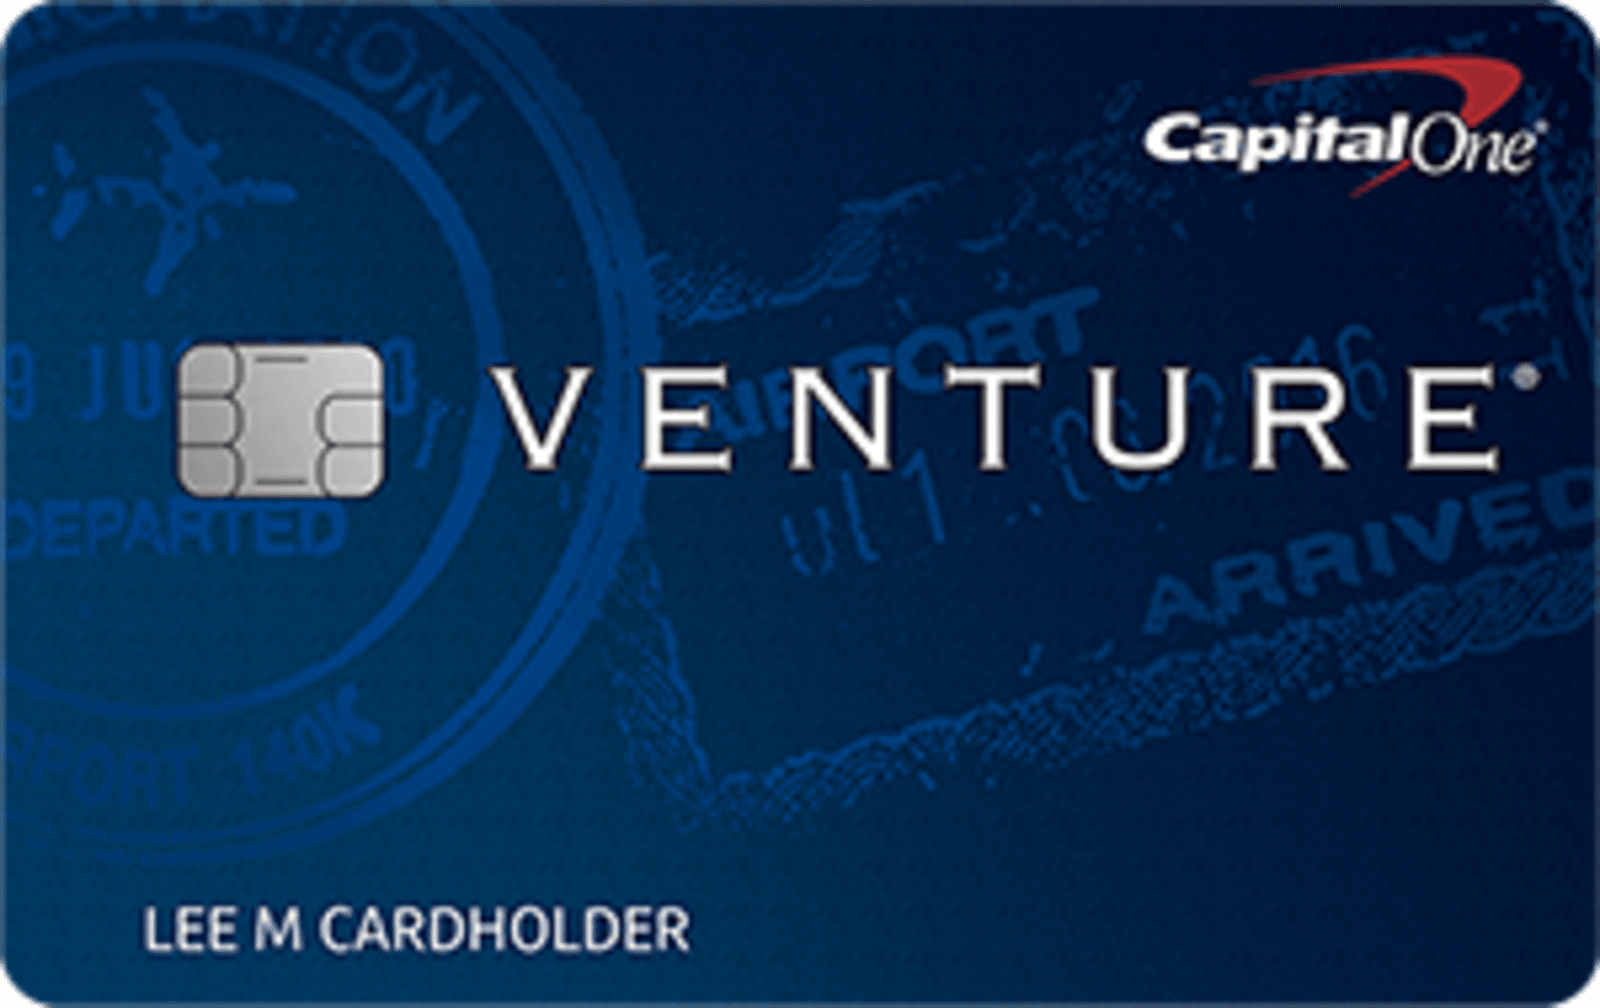 capital one customer service for credit cards